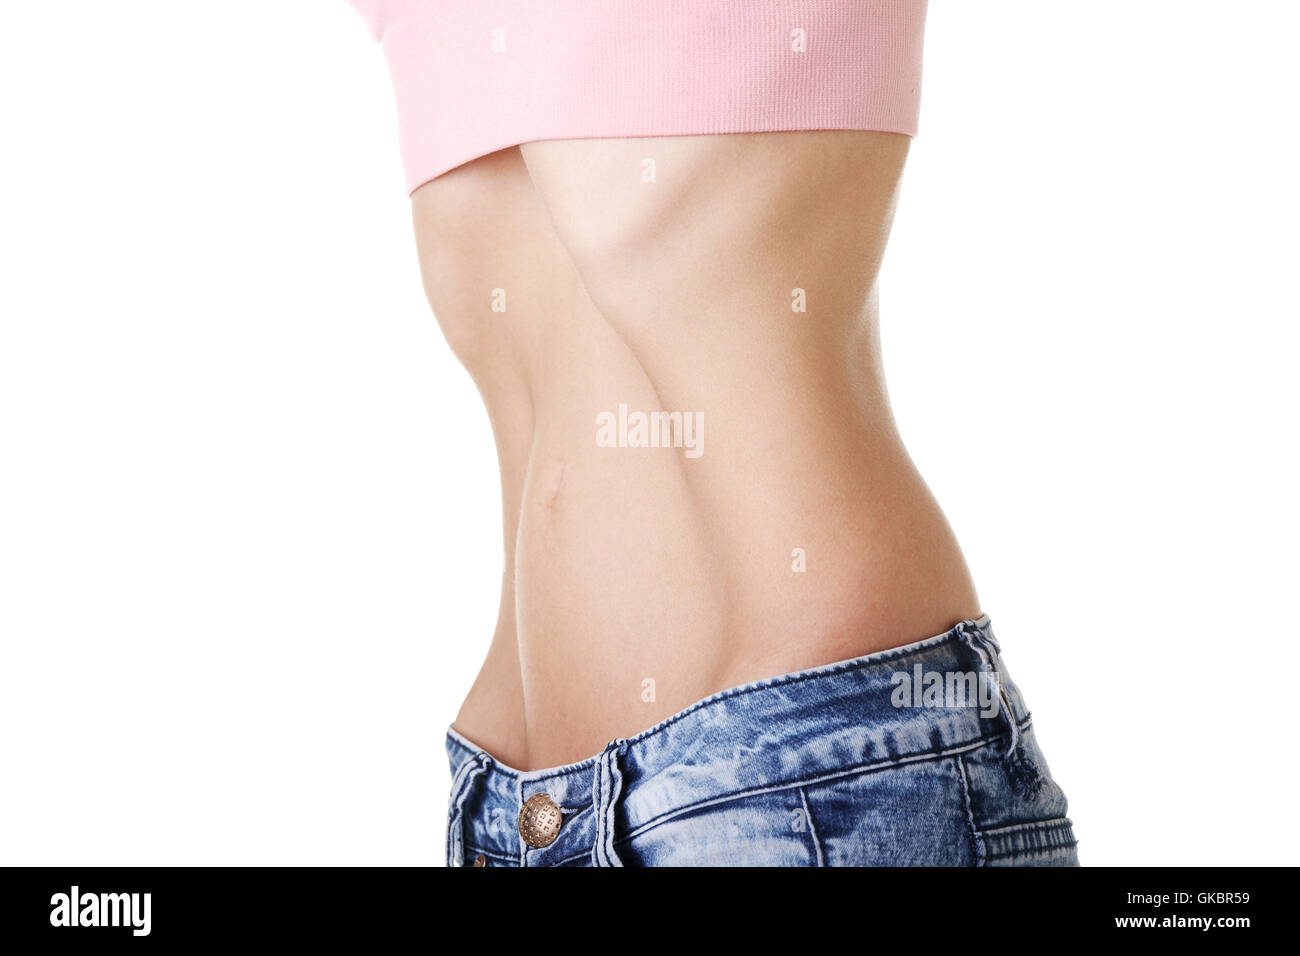 Thin Woman With A Thin Waist And Ribs Stock Photo, Picture and Royalty Free  Image. Image 51249513.